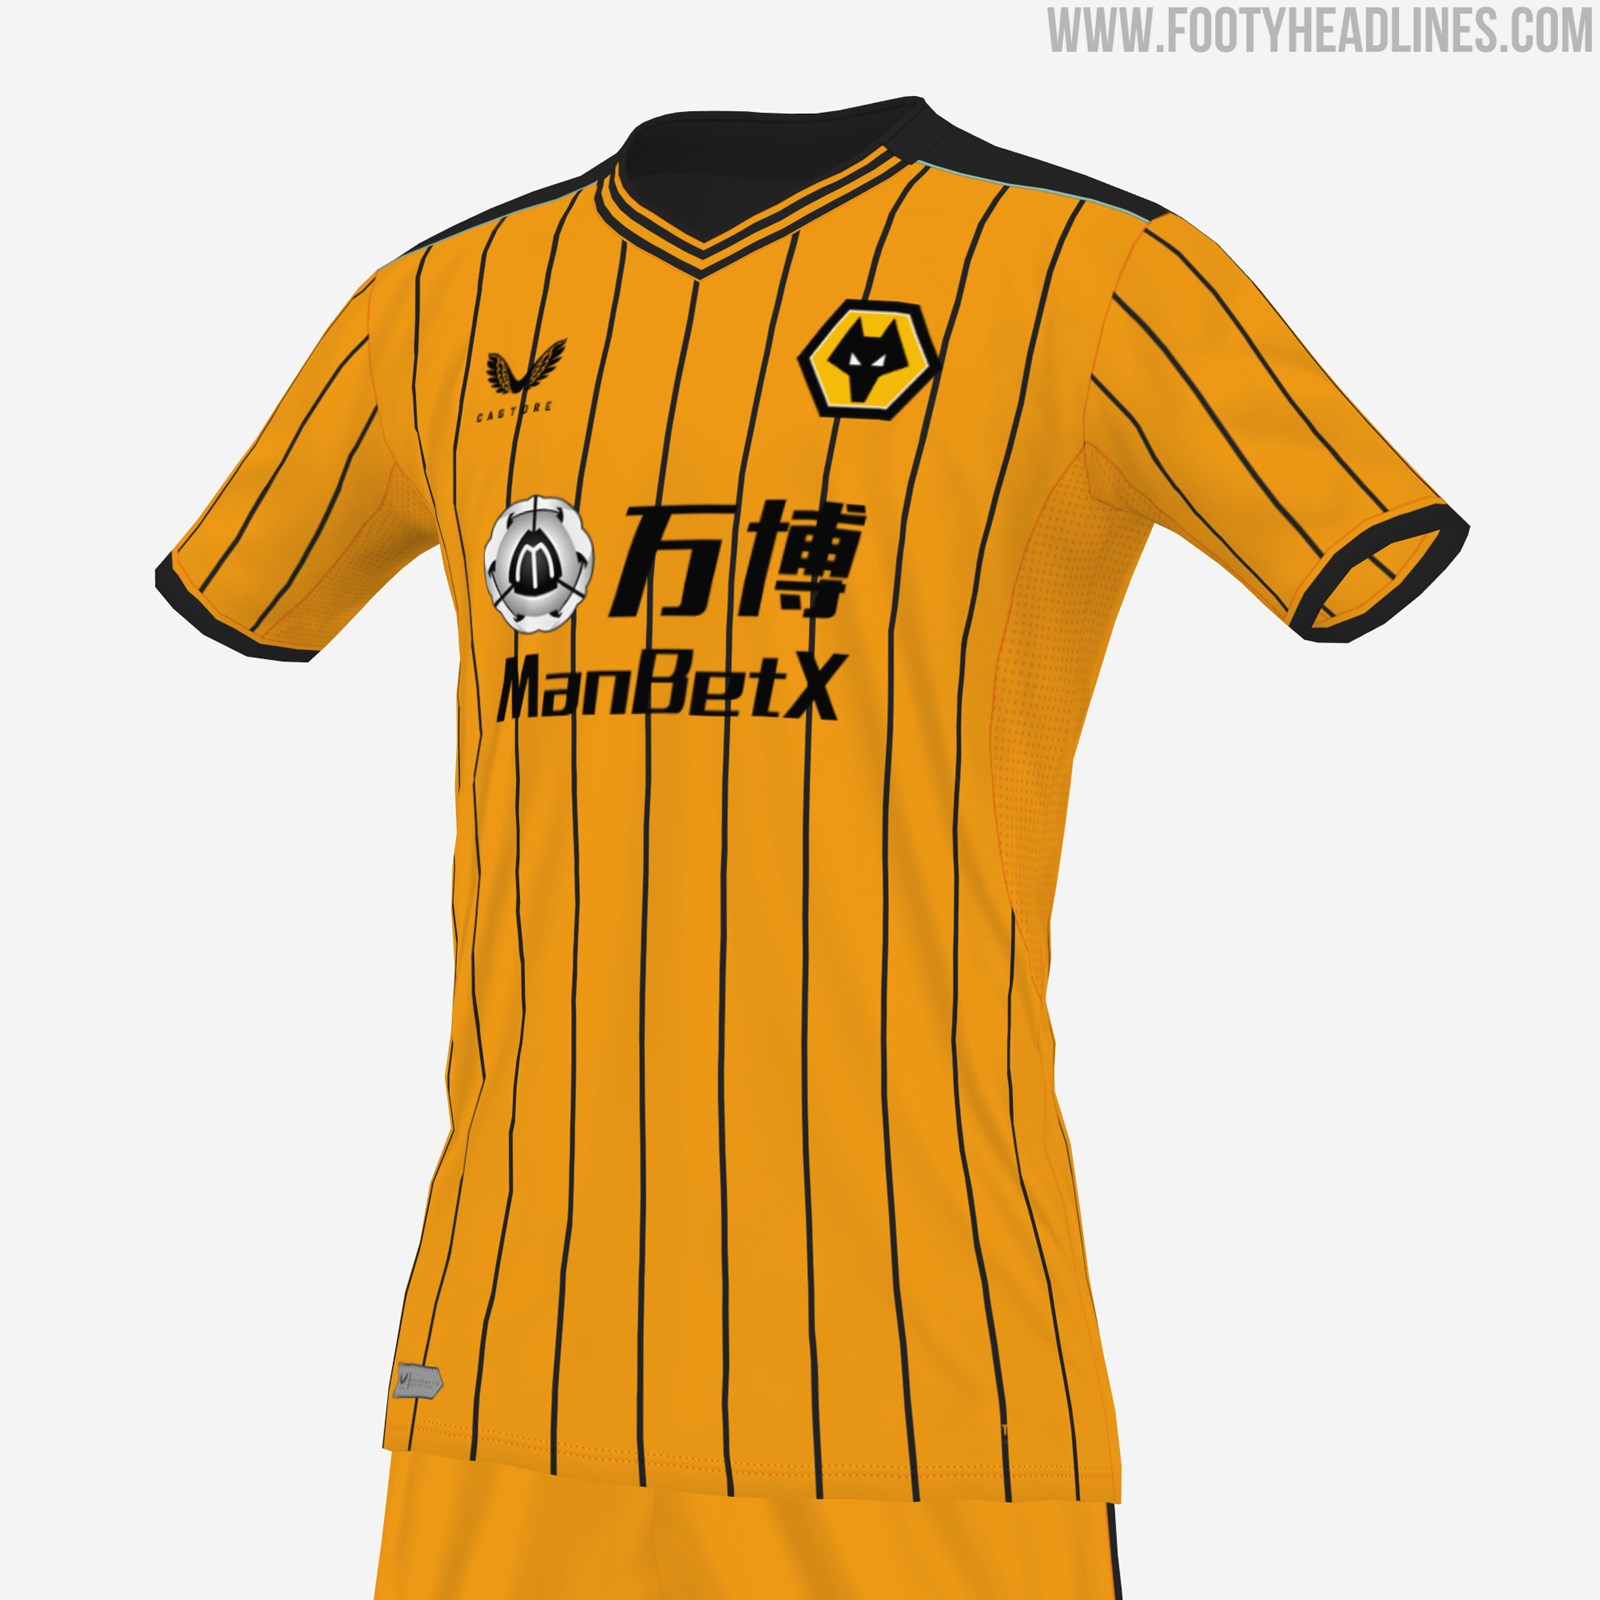 No More Adidas From 2021? Castore Wolves 21-22 Home, Away & Third Concept Kits Footy Headlines